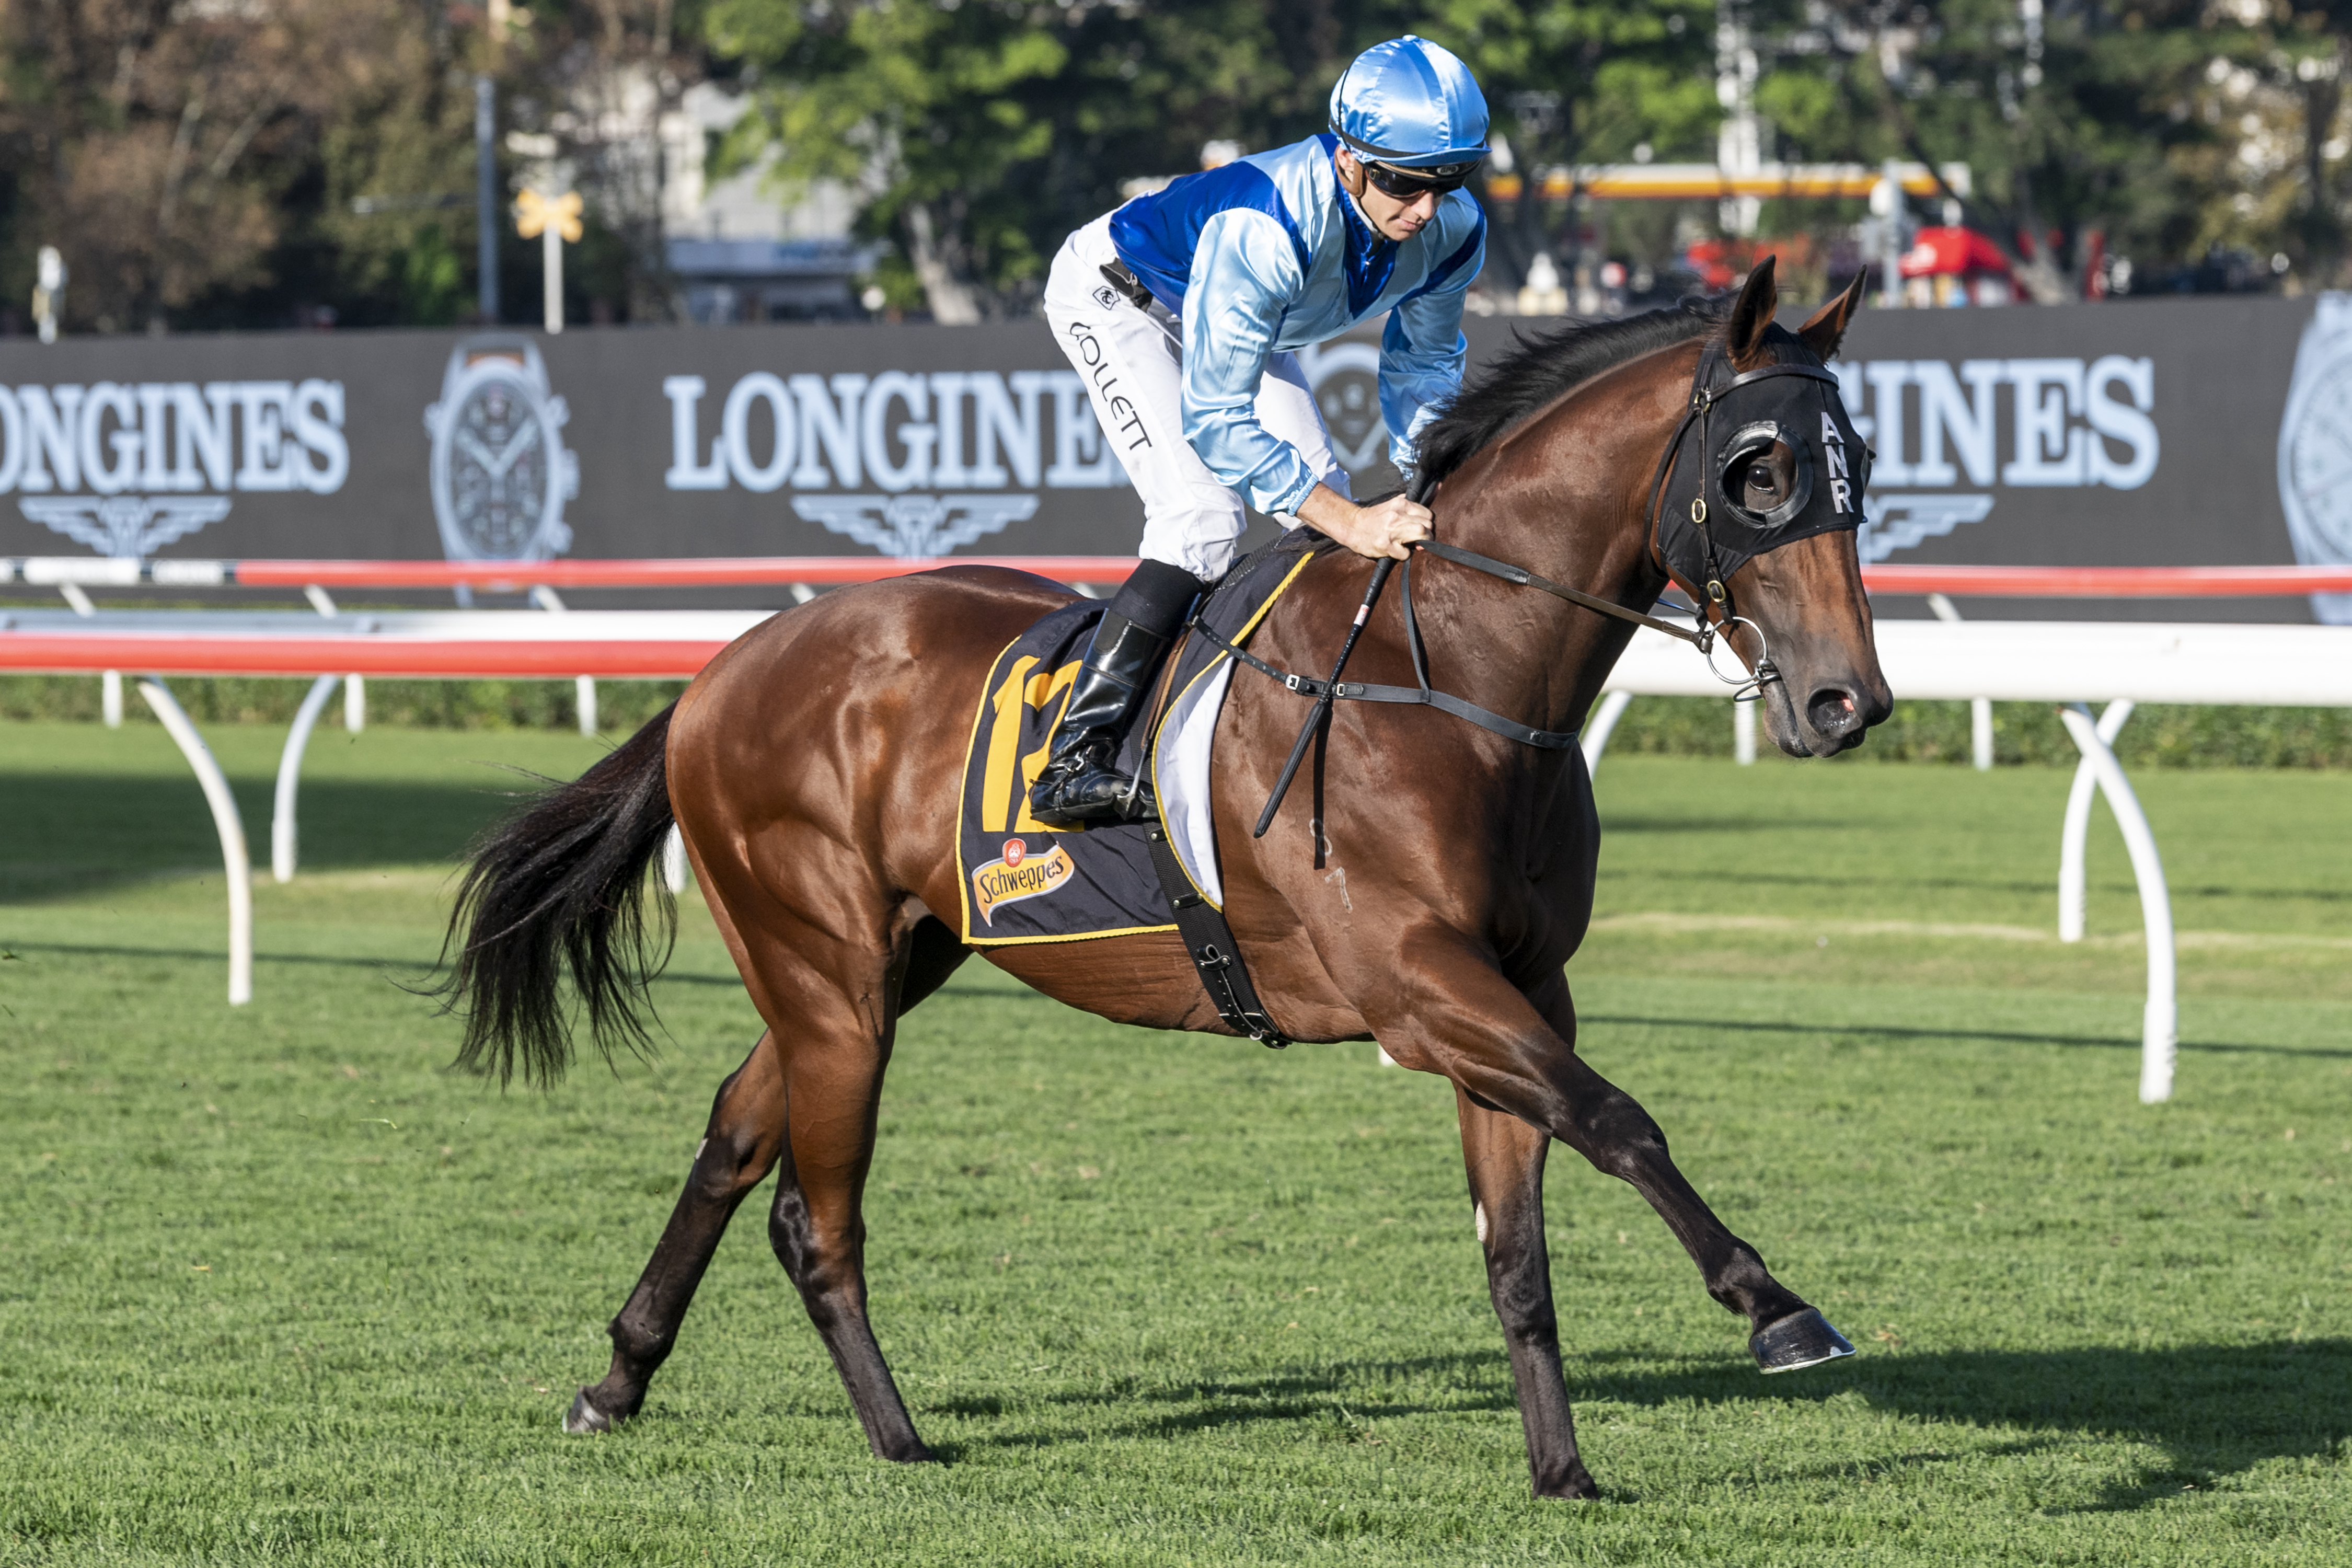 Prague ridden by Jason Collett cantering at Royal Randwick prior to the running of the (G1)All Aged Stakes.
Photo Credit: Darren Tindale - The Image is Everything
© The Image is Everything - Bronwen Healy Photography